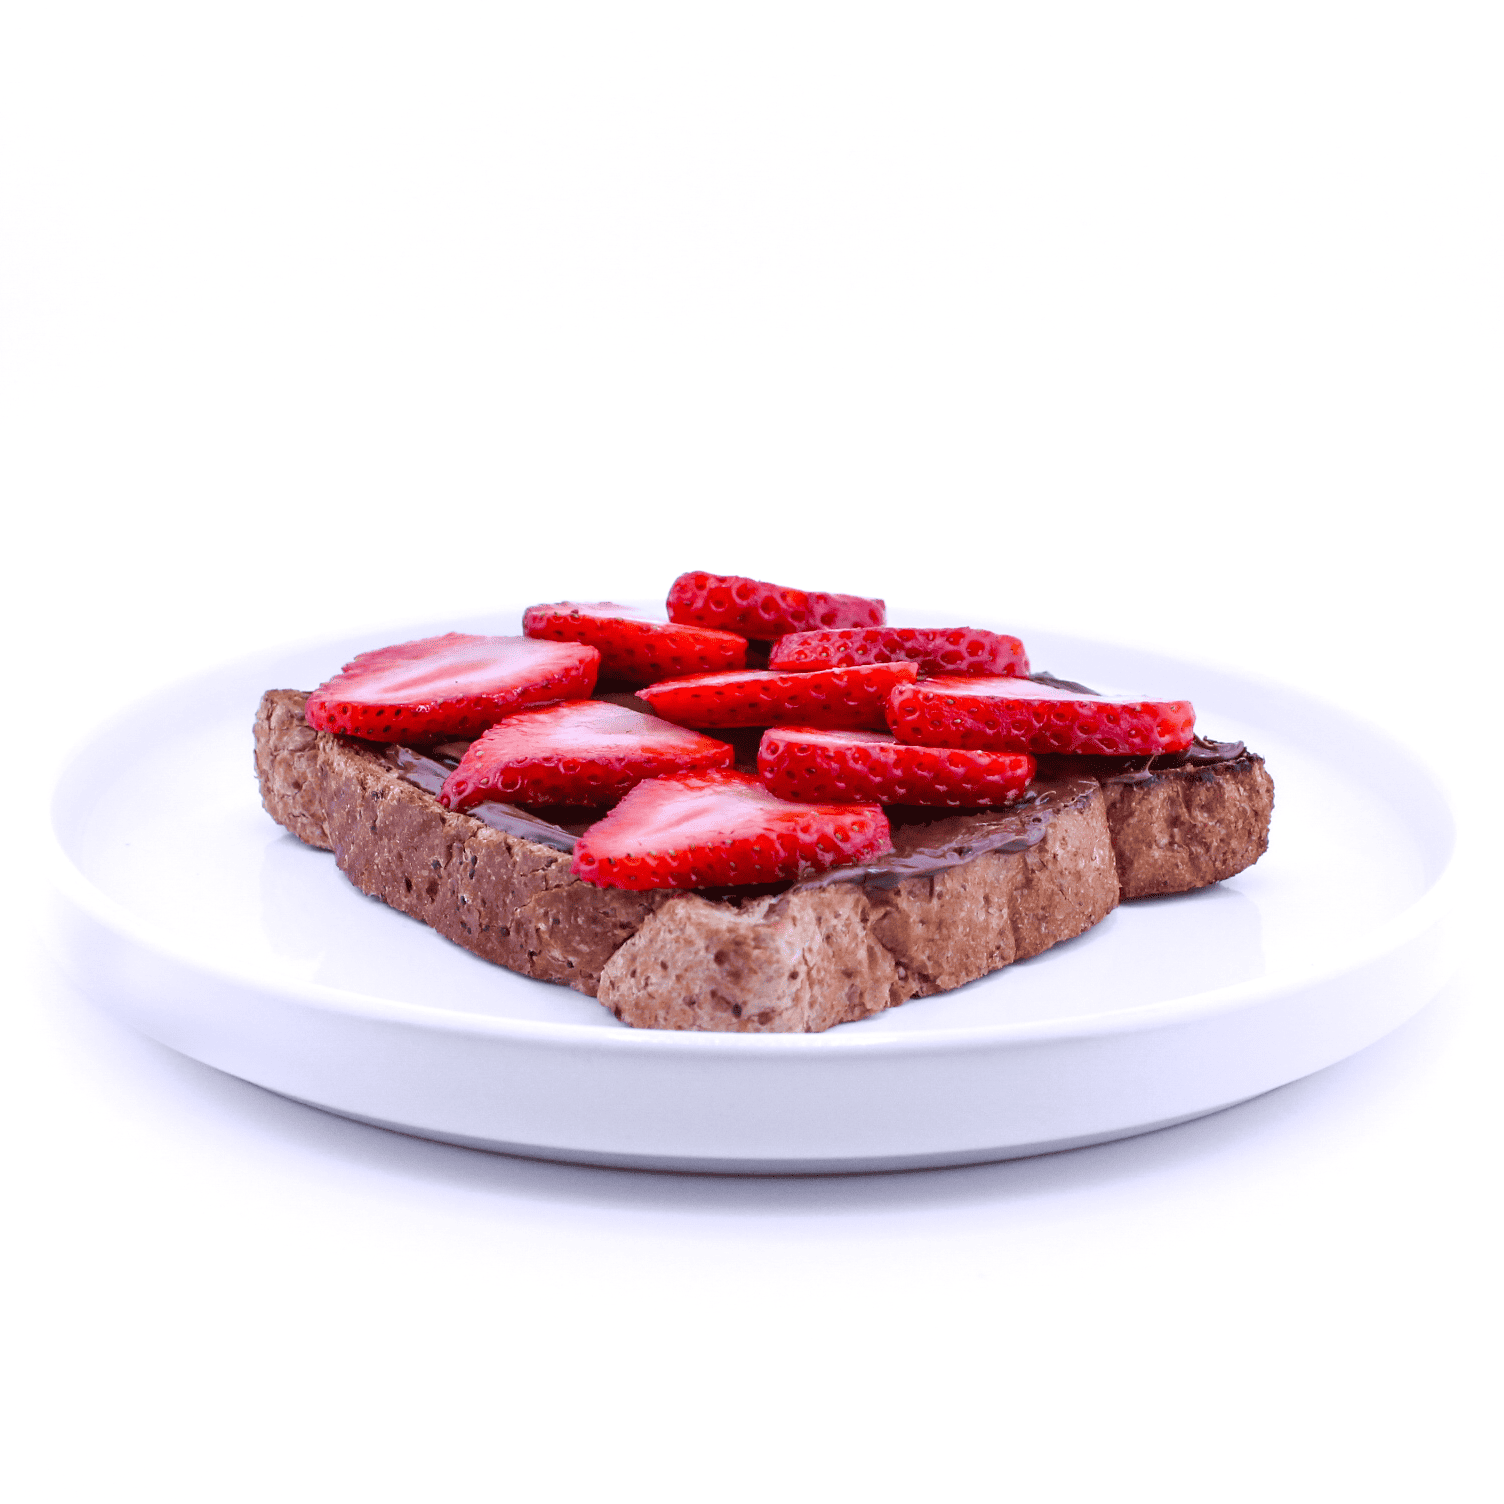 Nutella Toast- Nutella hazelnut spread, strawberry slices on toasted honey wheat, Contains Nuts, Vegetarian